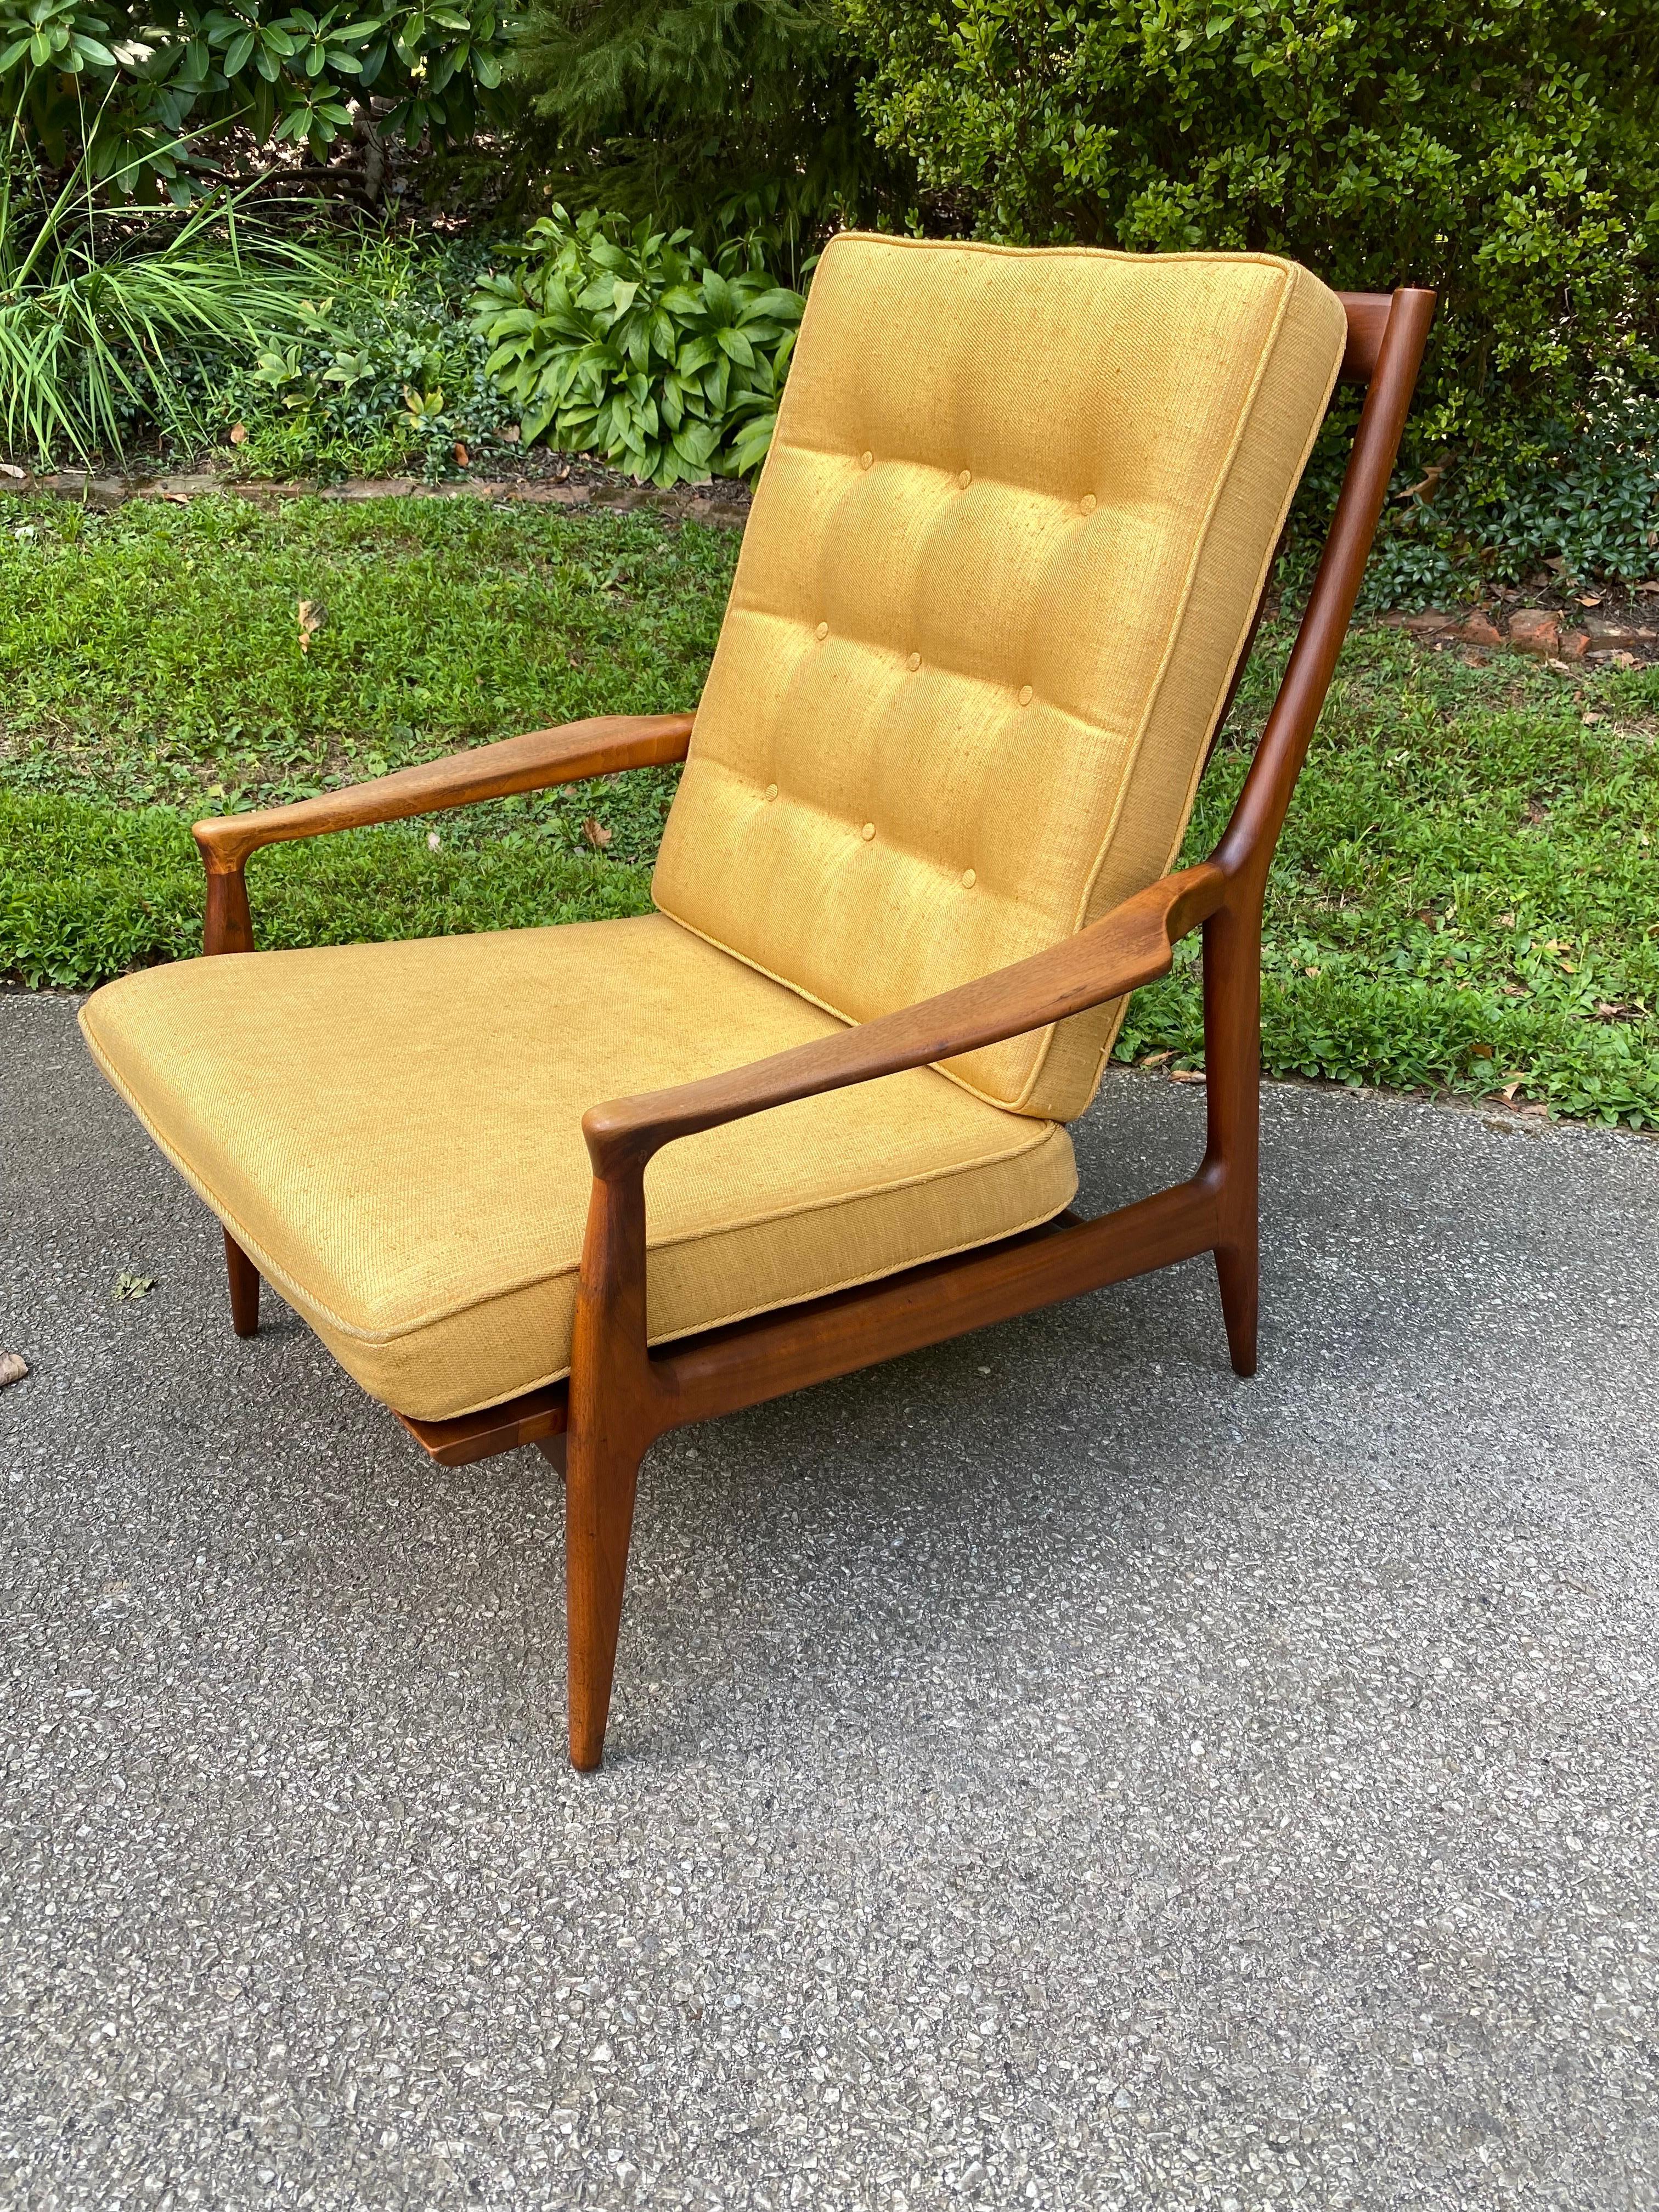 Milo Baughman for James Furniture Company Open Arm High-Back Lounge Chair and Ottoman. The chair turns up quite a bit, but amazing to have the ottoman! Rougly 30